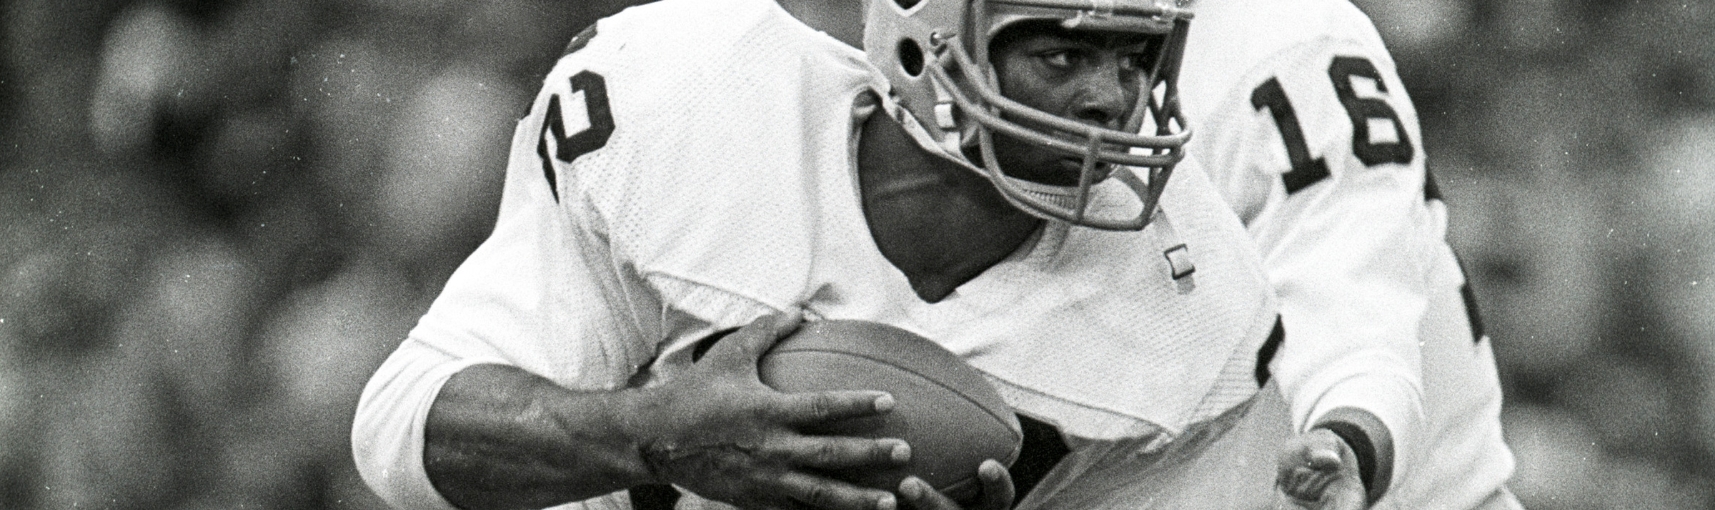 A man in a football uniform is holding a football